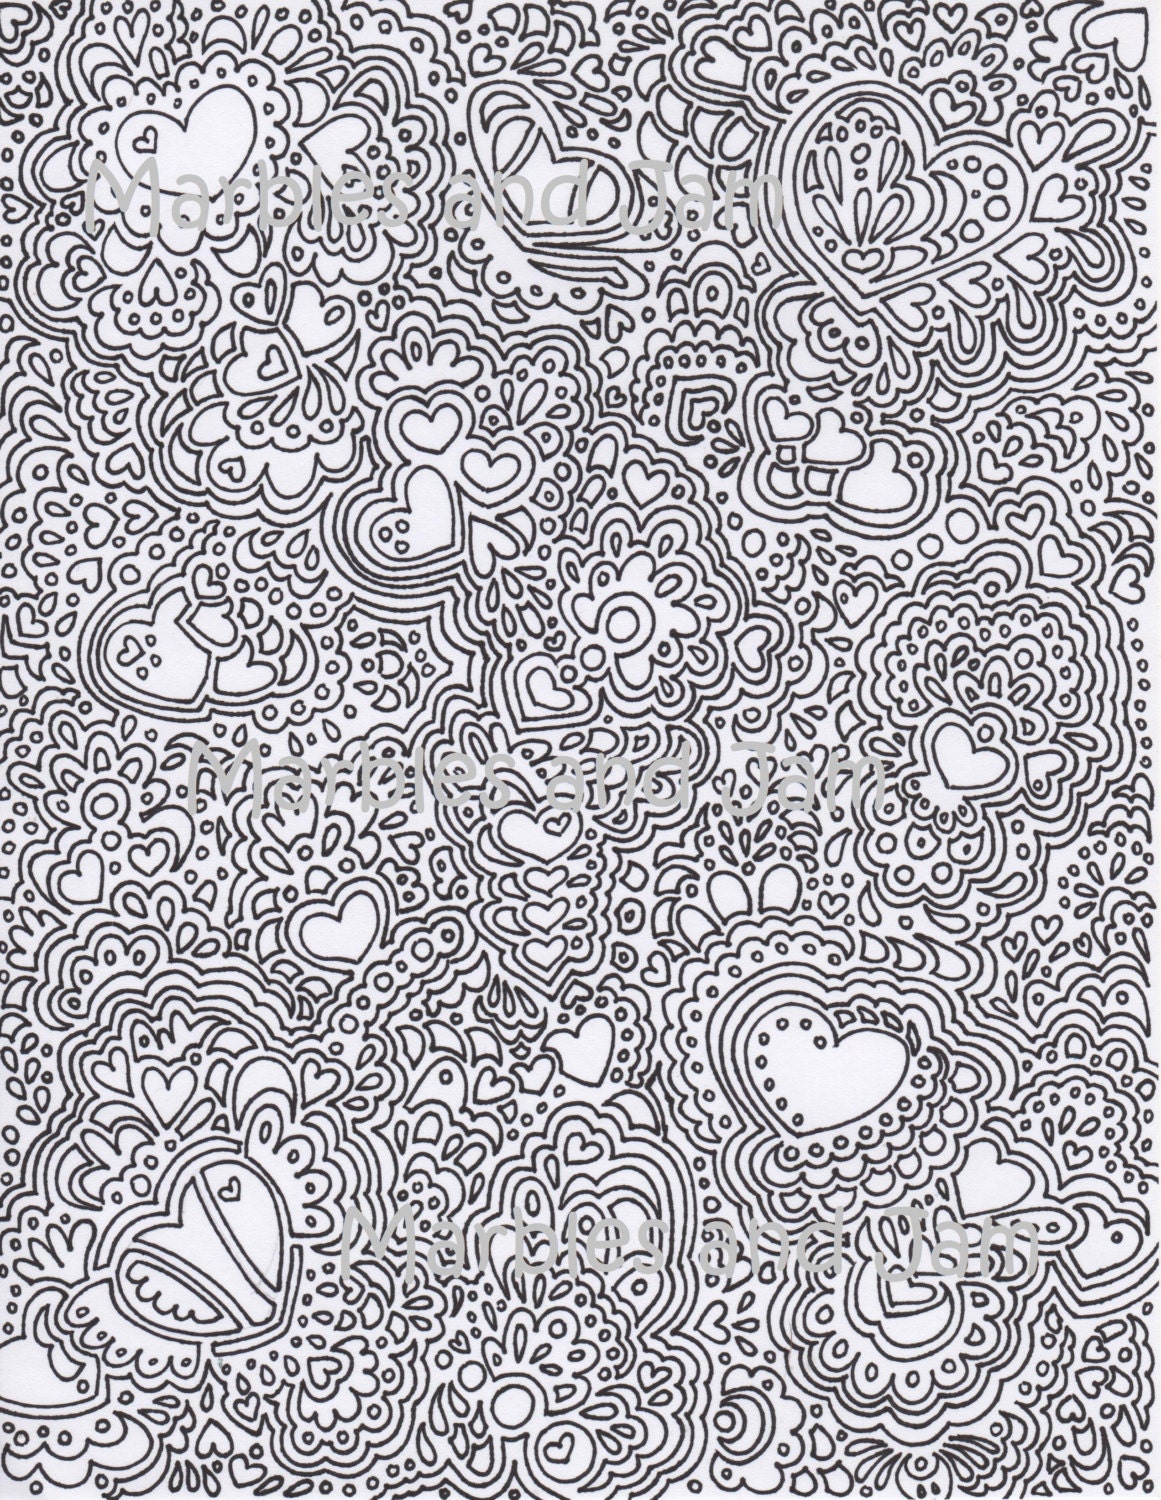 Abstract hearts printable adult coloring page